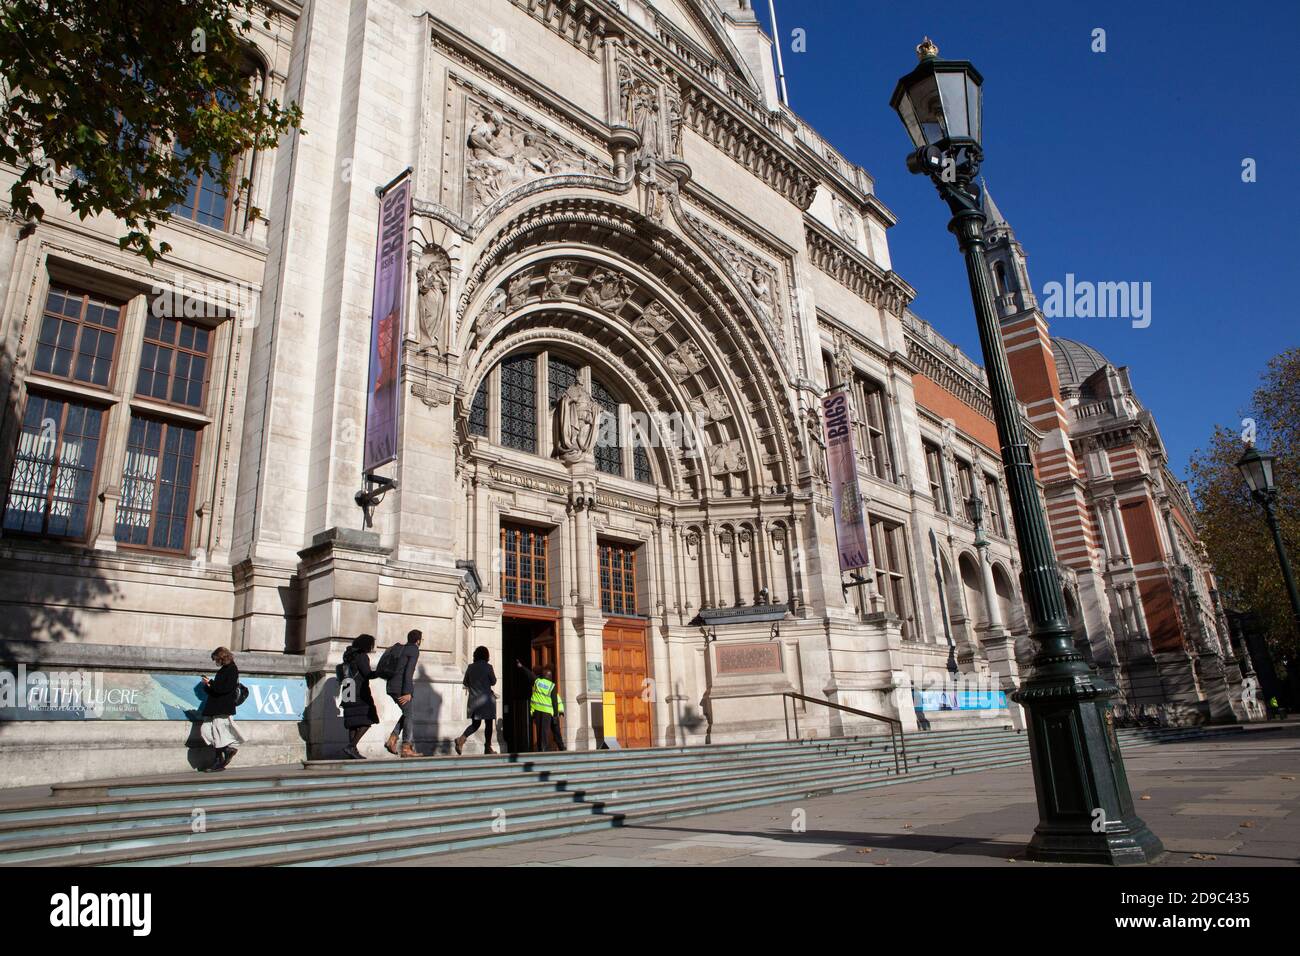 London, UK: visitors to the Victoria and Albert Museum in London on the last day of opening before the four-week lockdown. Anna Watson/Alamy Live News Stock Photo